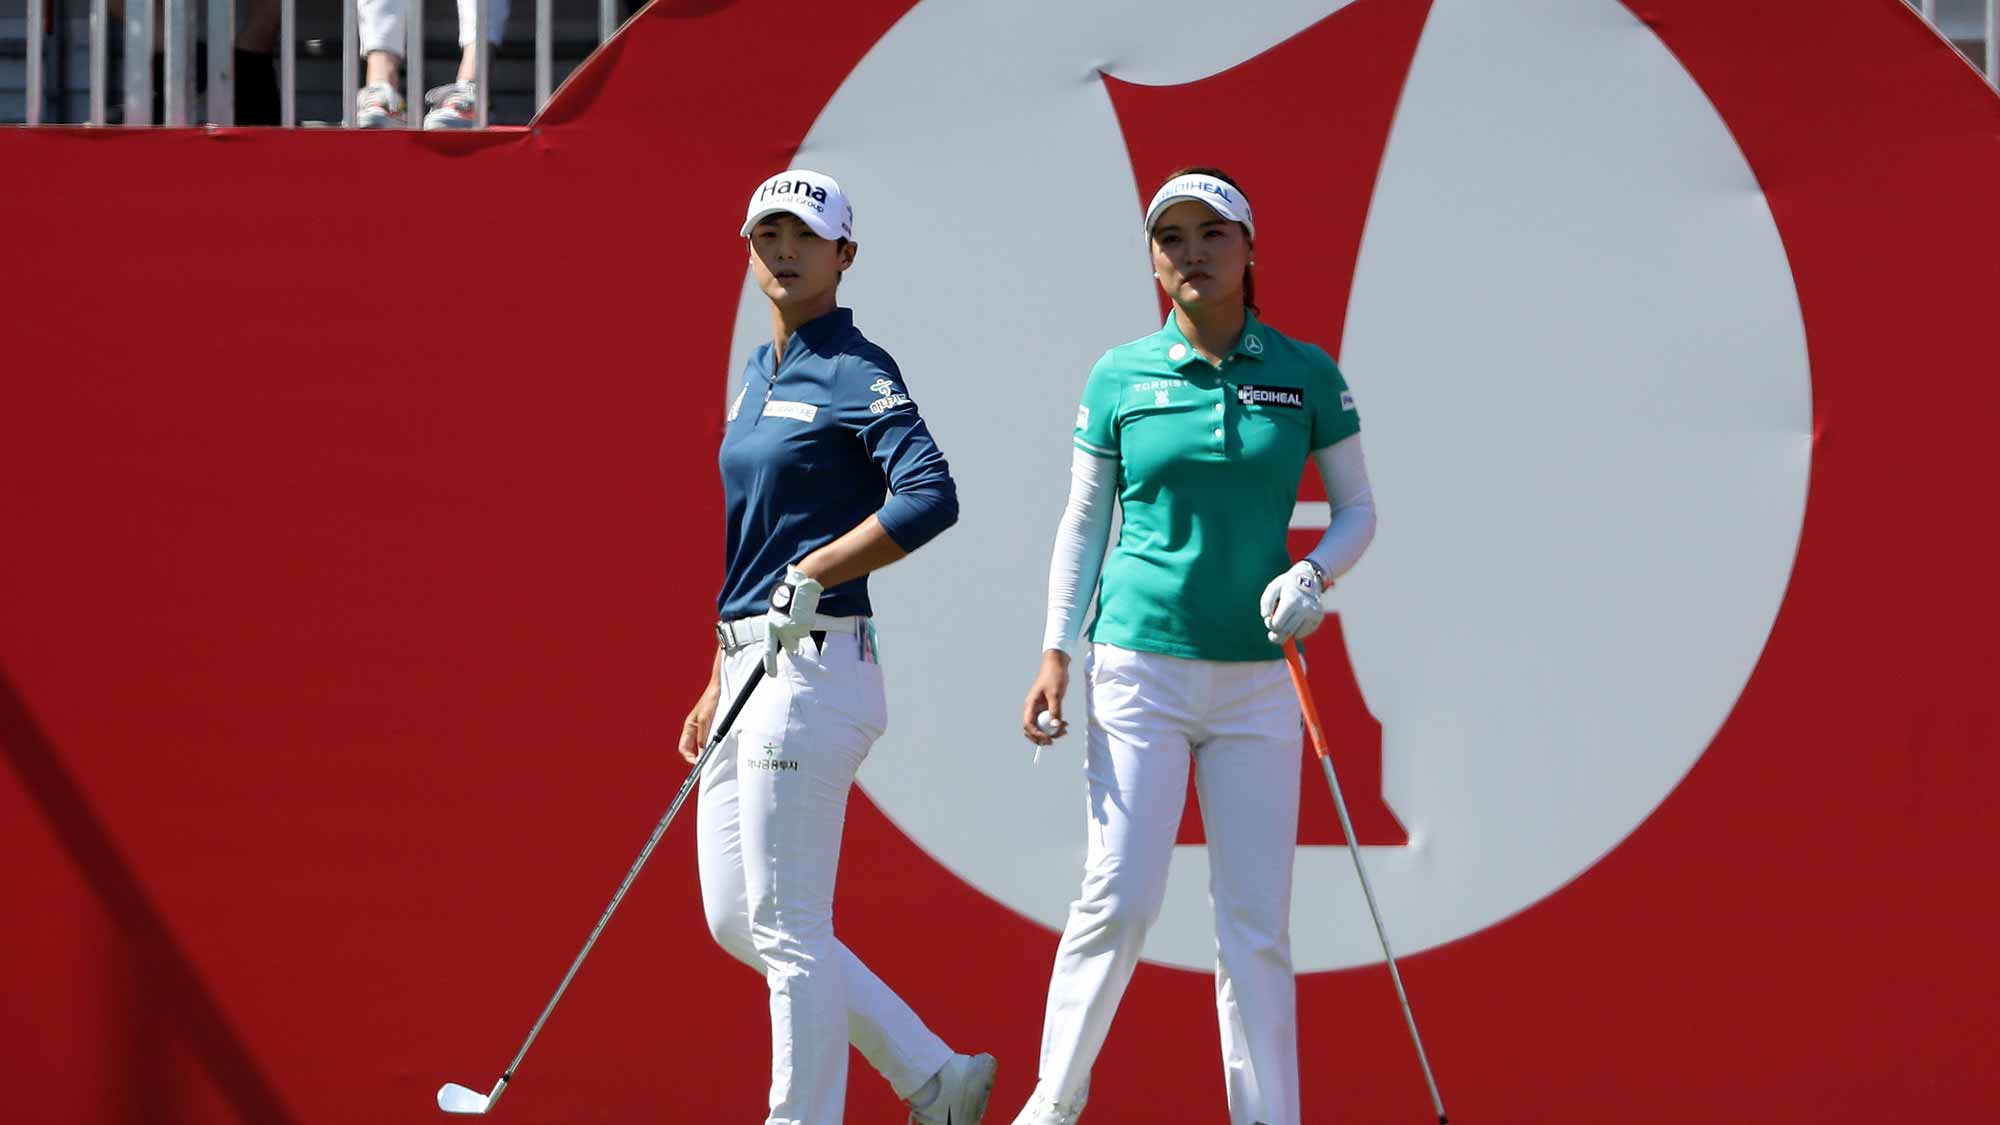 So Yeon Ryu of South Korea prepares to play her tee shot behind Sung Hyun Park on the first hole during the final round of the Ricoh Women's British Open at Royal Lytham and St Annes Golf Club on August 5, 2018 in Lytham St Annes, England